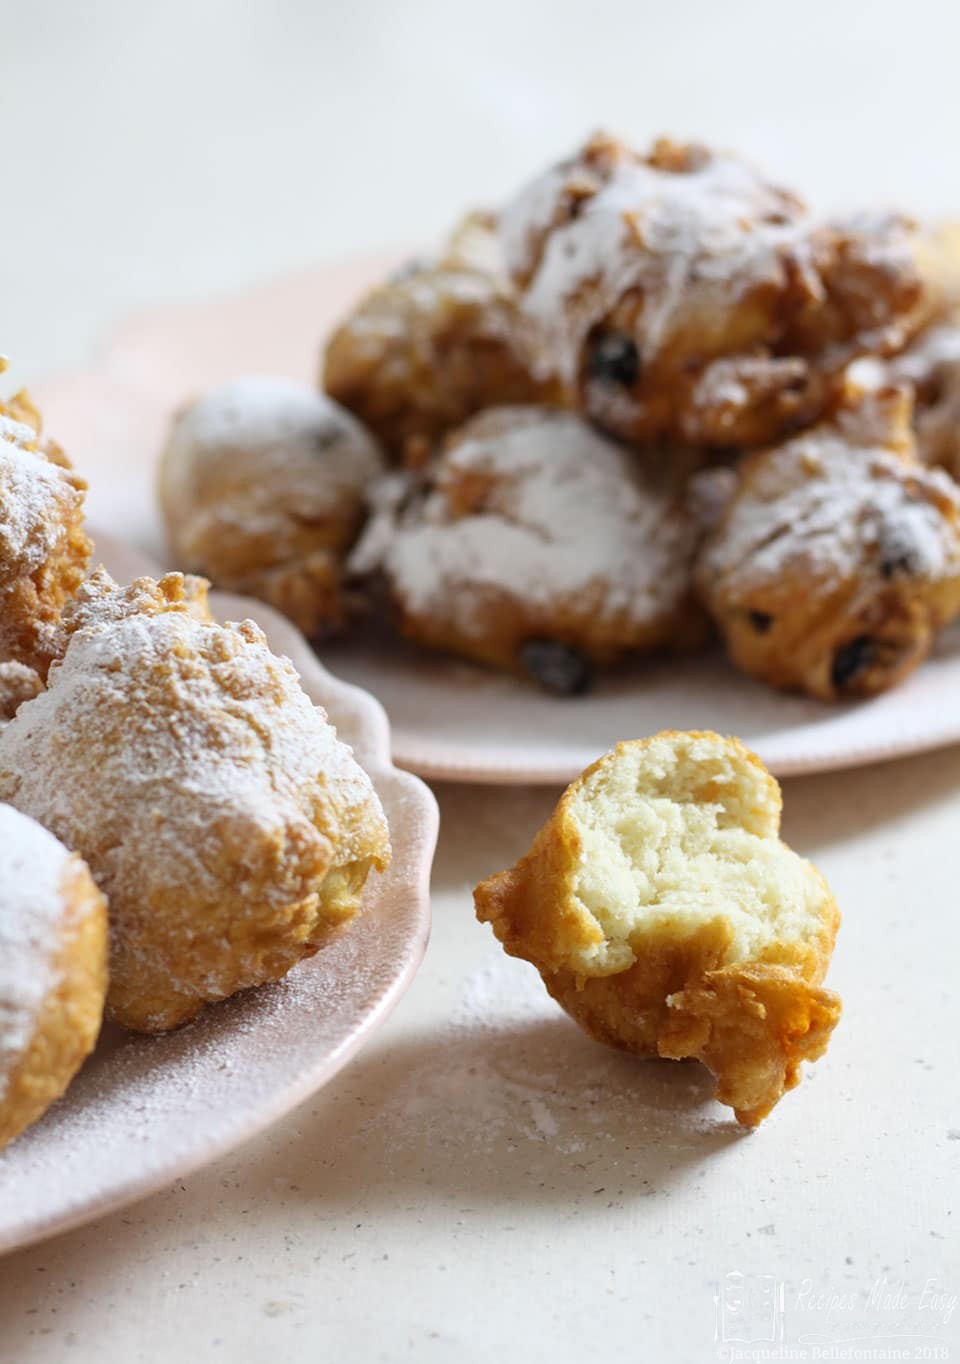 Recipes Made Easy - Oliebollen (Dutch doughnuts) -delicious balls of dough deep fried and served dusted with icing sugar.